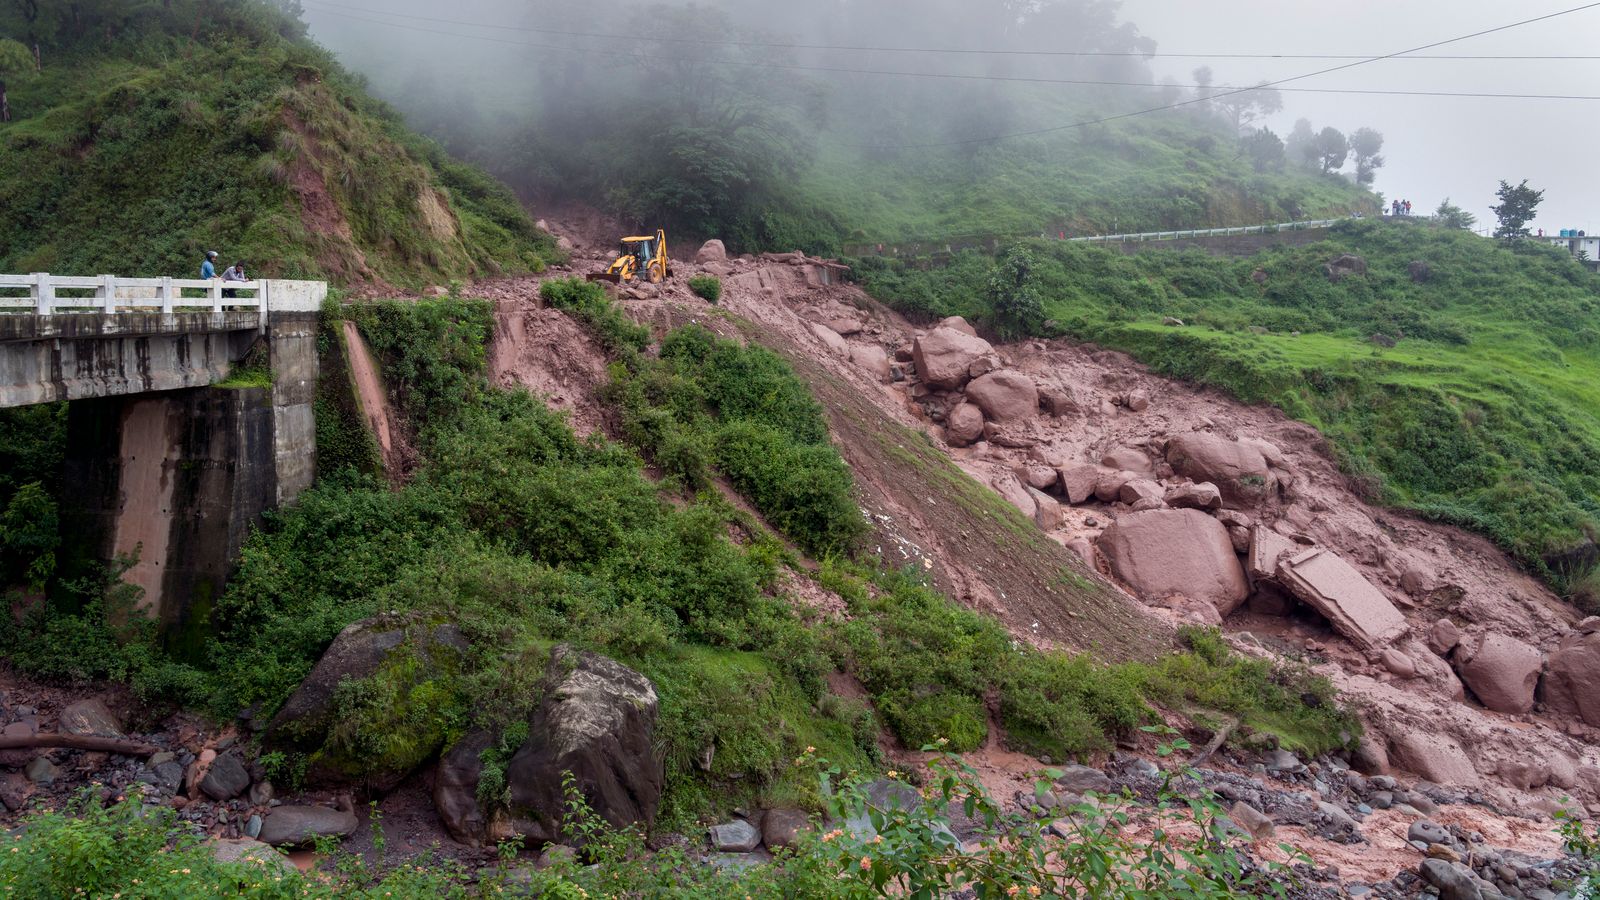 India: At least 72 people killed in flash floods and landslides triggered by torrential rain in Himalayan region